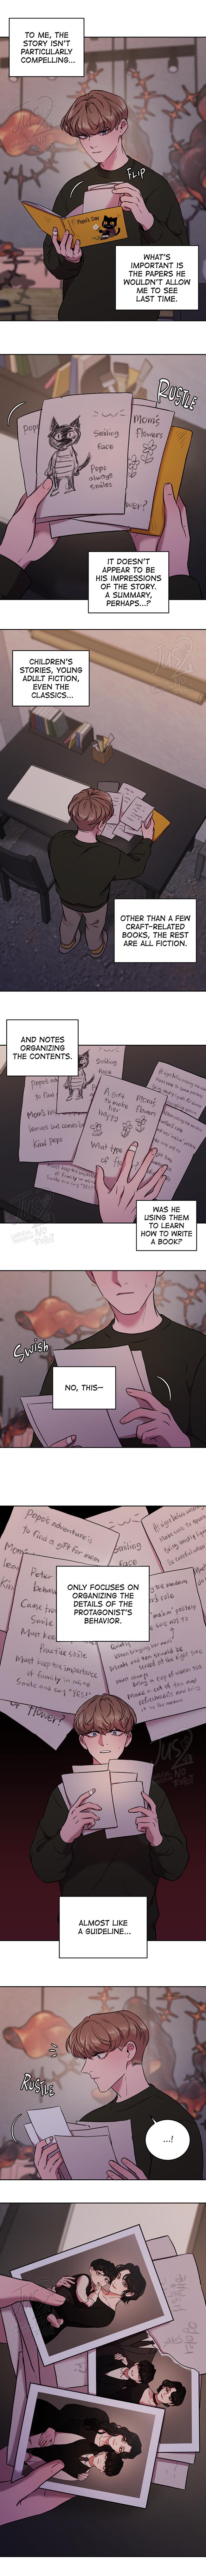 Hwanyoung's Misery - Page 3